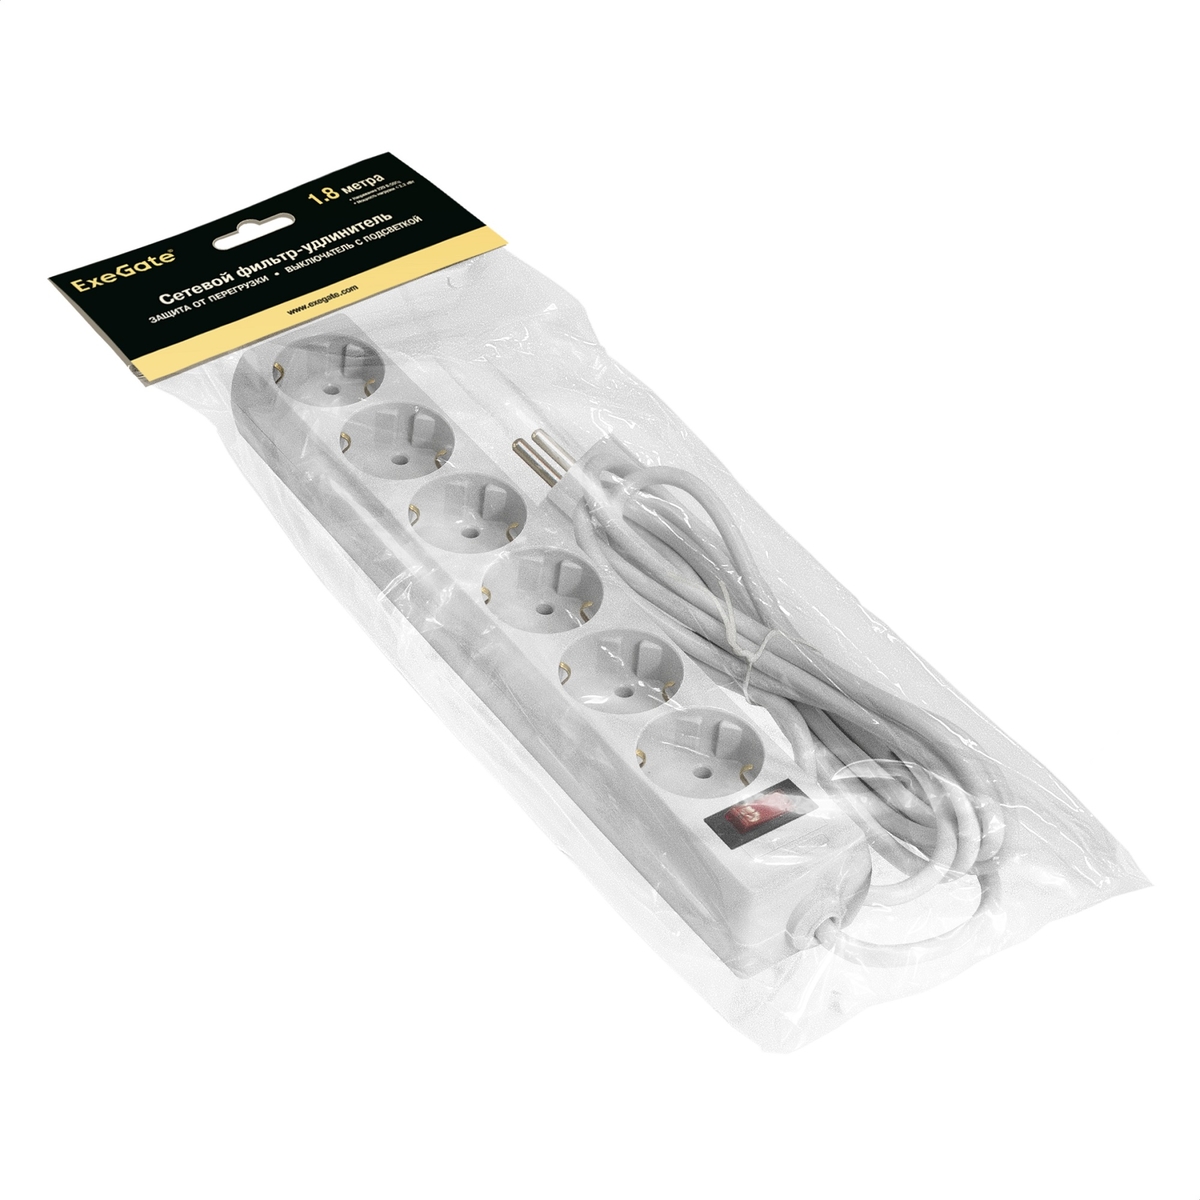 Surge protector ExeGate SP-6-1.8W